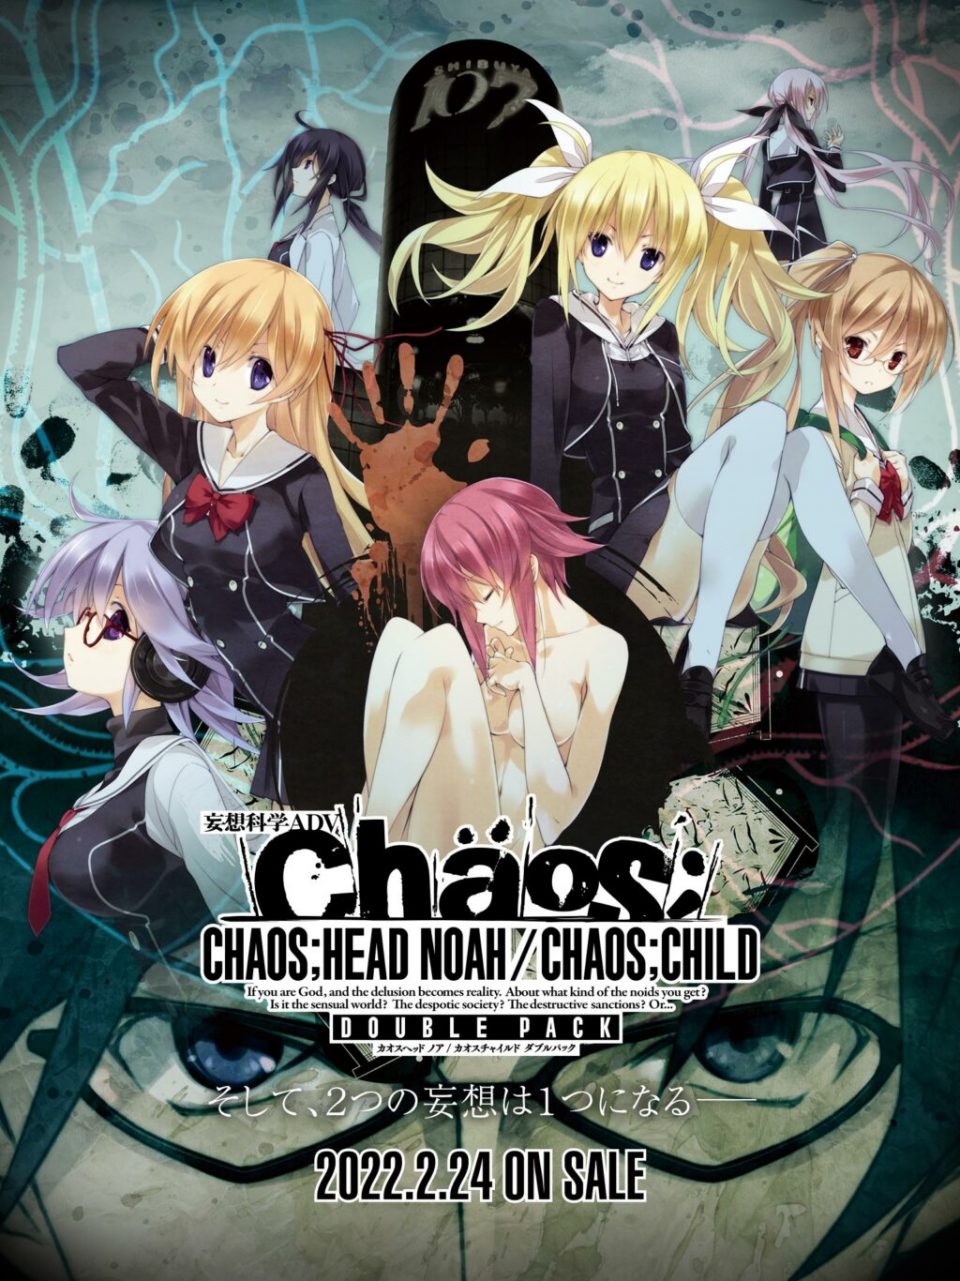 Chaos;Head Noah / Chaos;Child Double Pack annunciato per Switch 2